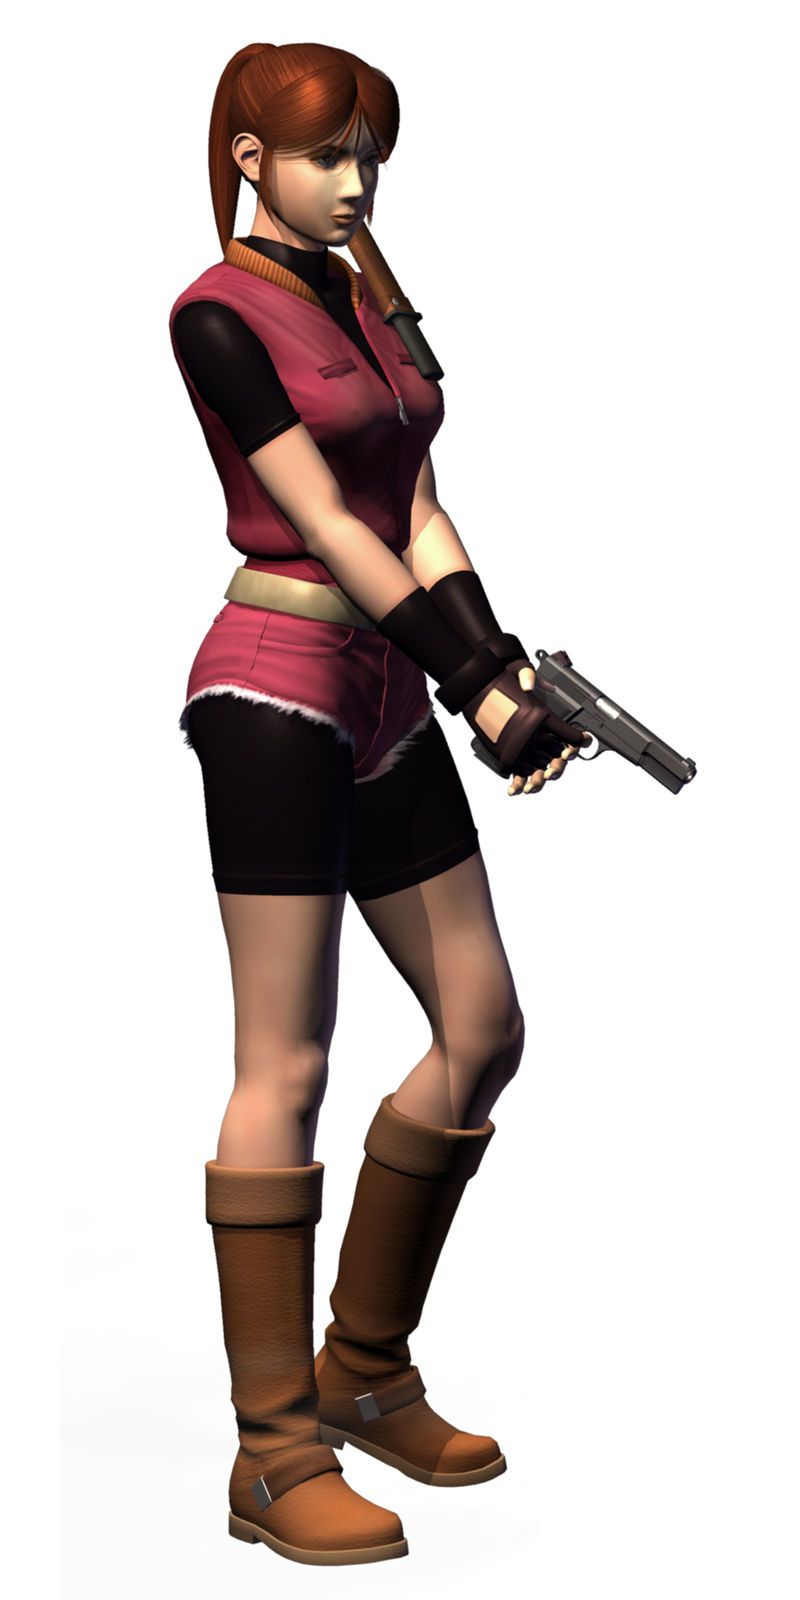 Claire Redfield's image from the resident evil series 2